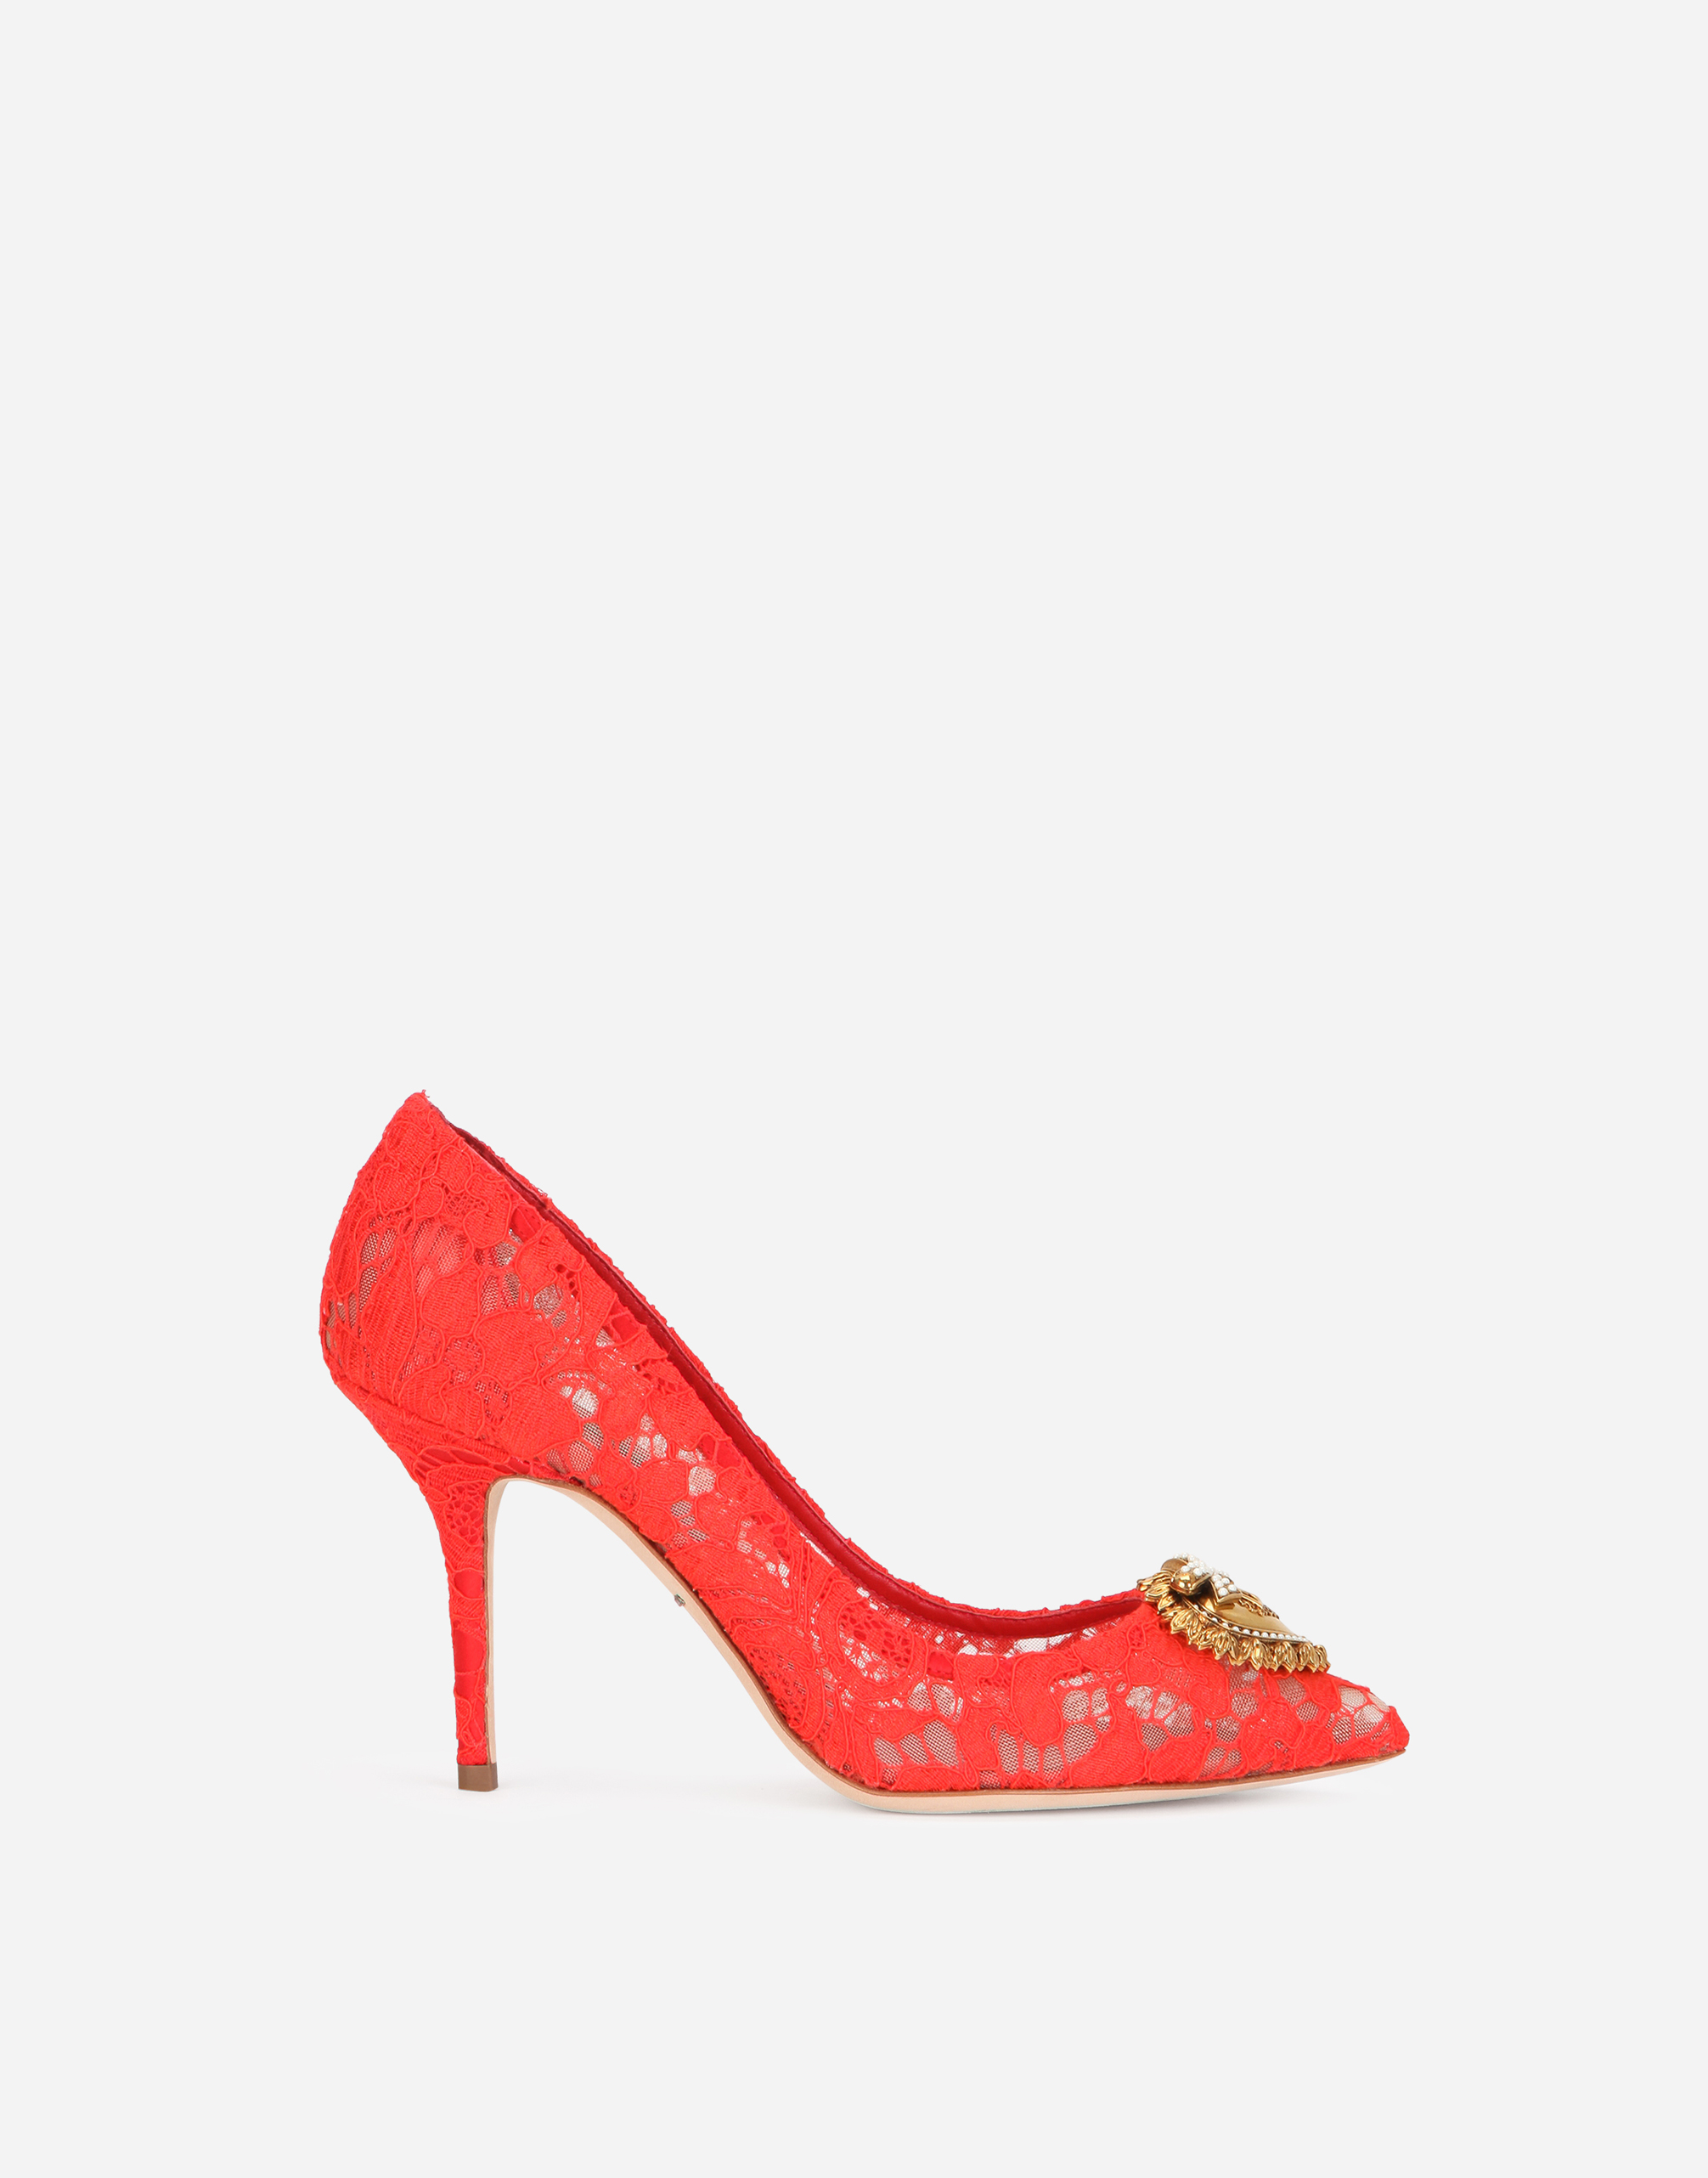 DOLCE & GABBANA TAORMINA LACE PUMPS WITH DEVOTION HEART